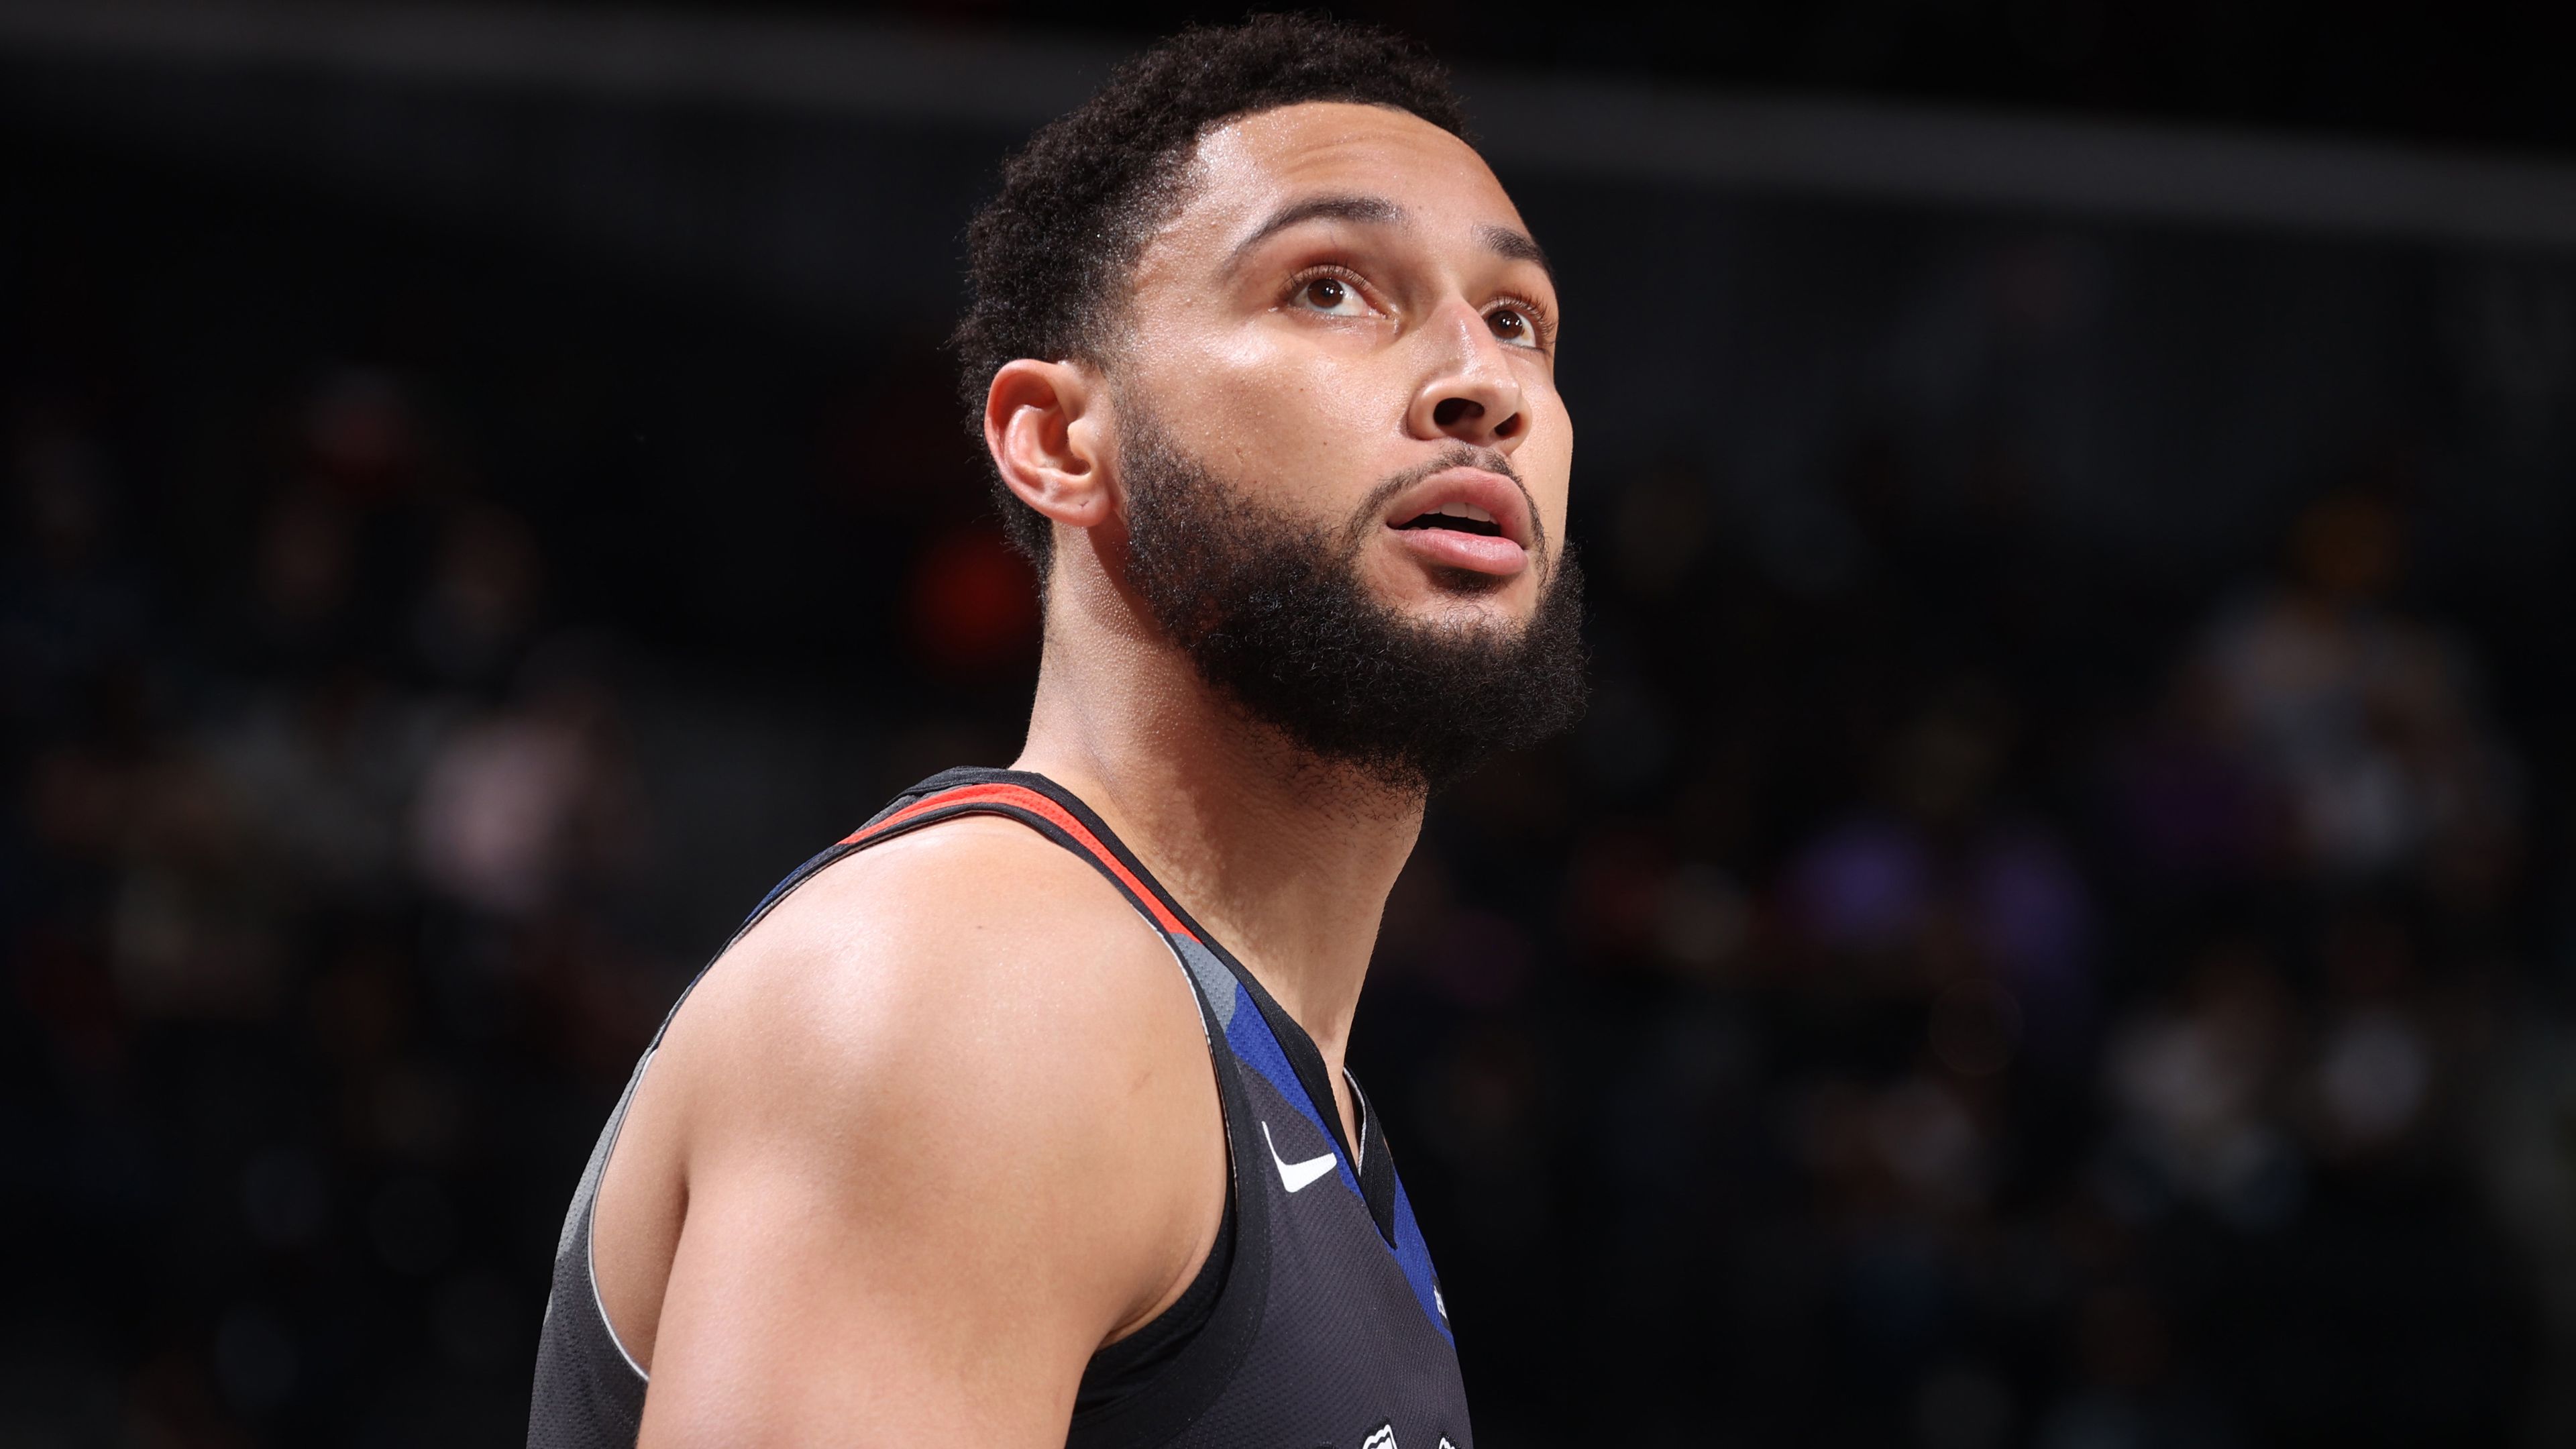 Ben Simmons of the Brooklyn Nets looks on during the game against the Utah Jazz.